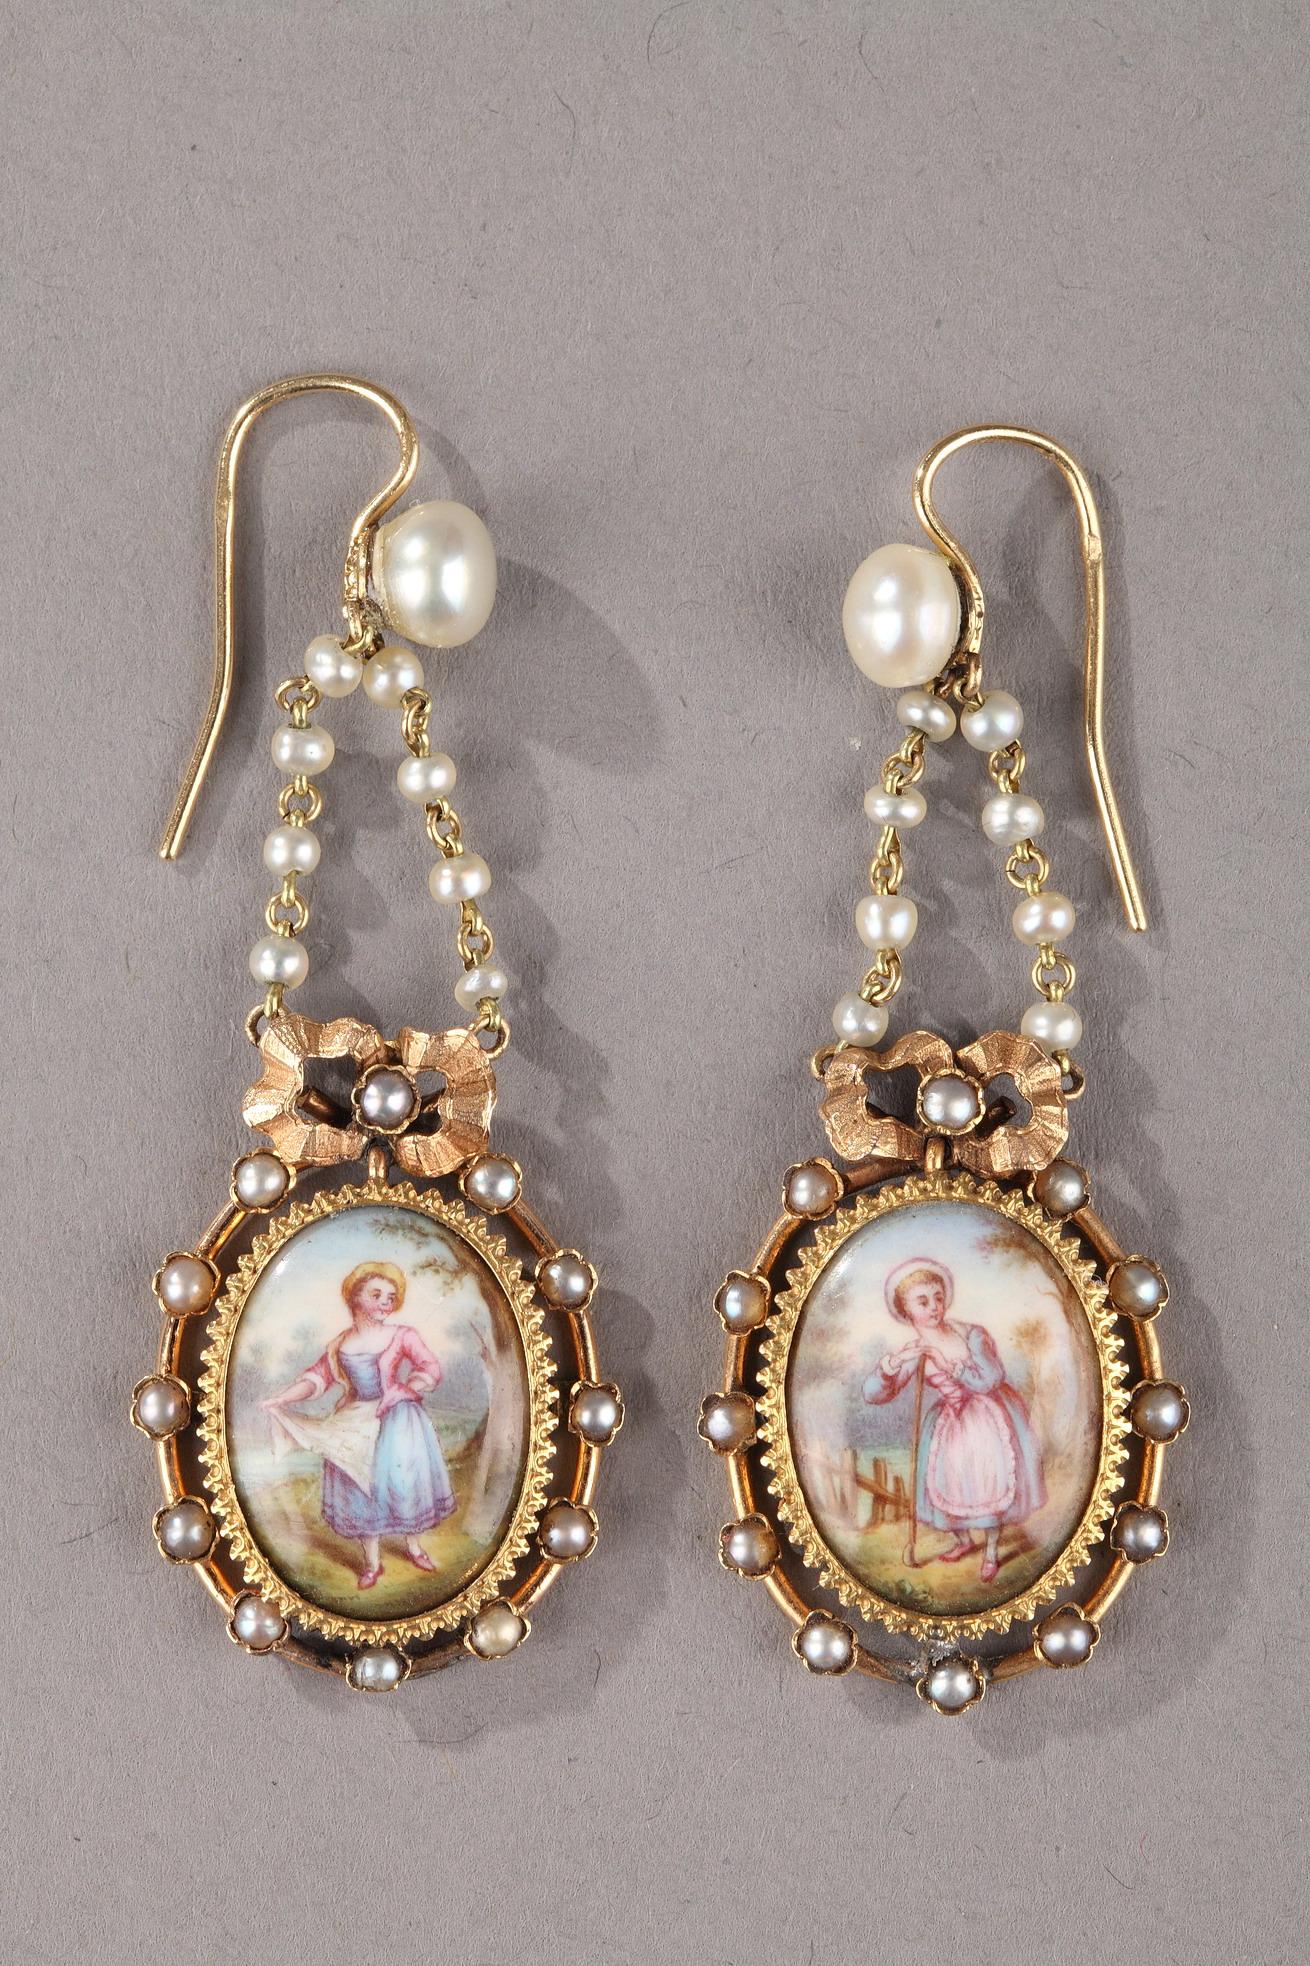 Pair of gold earrings. The pendant of each earring is suspended by alternating pearls and gold beads. Enamel medallions set in a gold mounting embellish the earrings. The mounting itself is set with pearls and topped with a bow. The miniatures